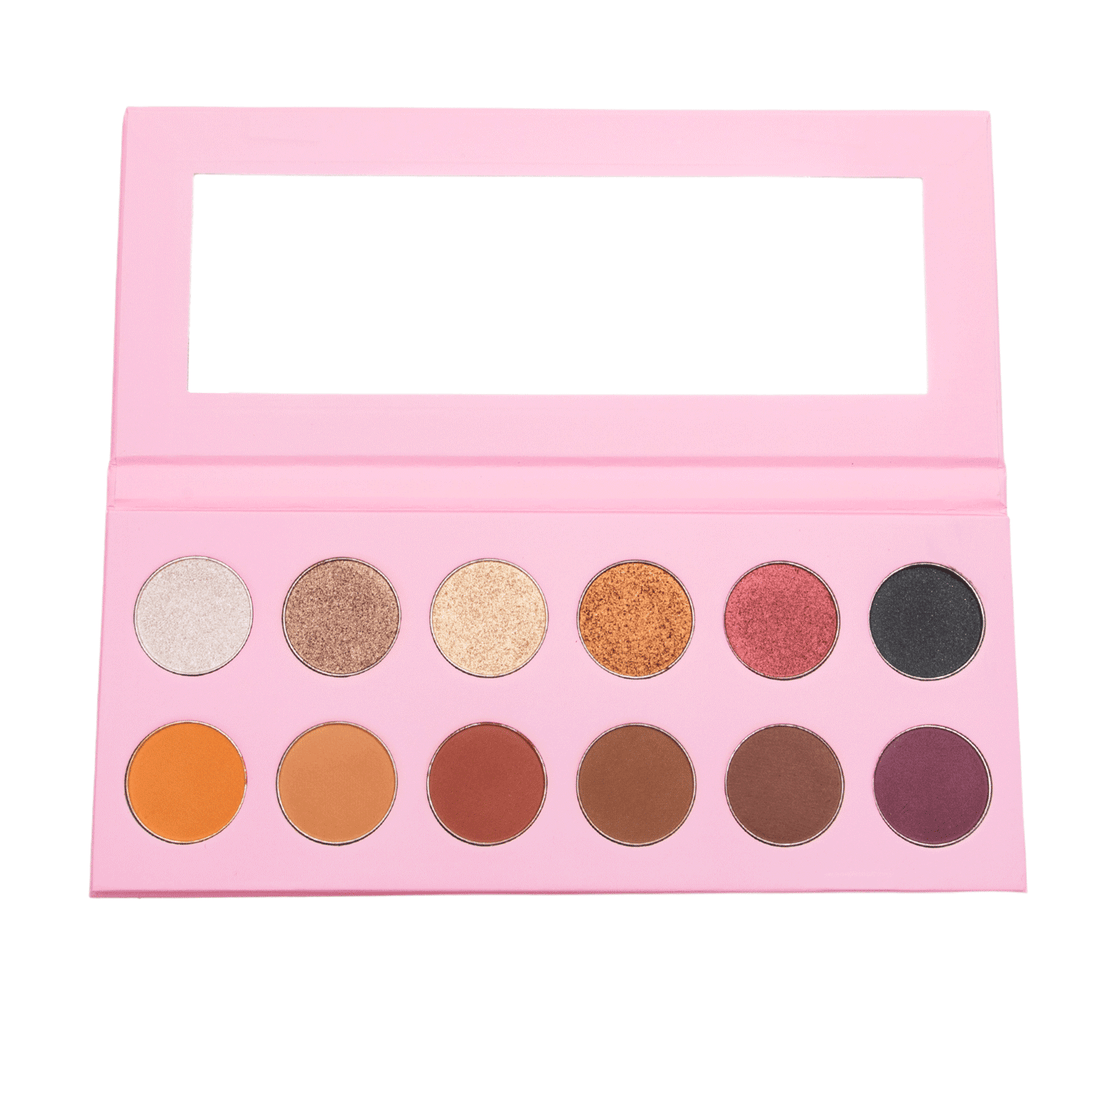 Halouw Professional Eyeshadow Palette - In the Nude